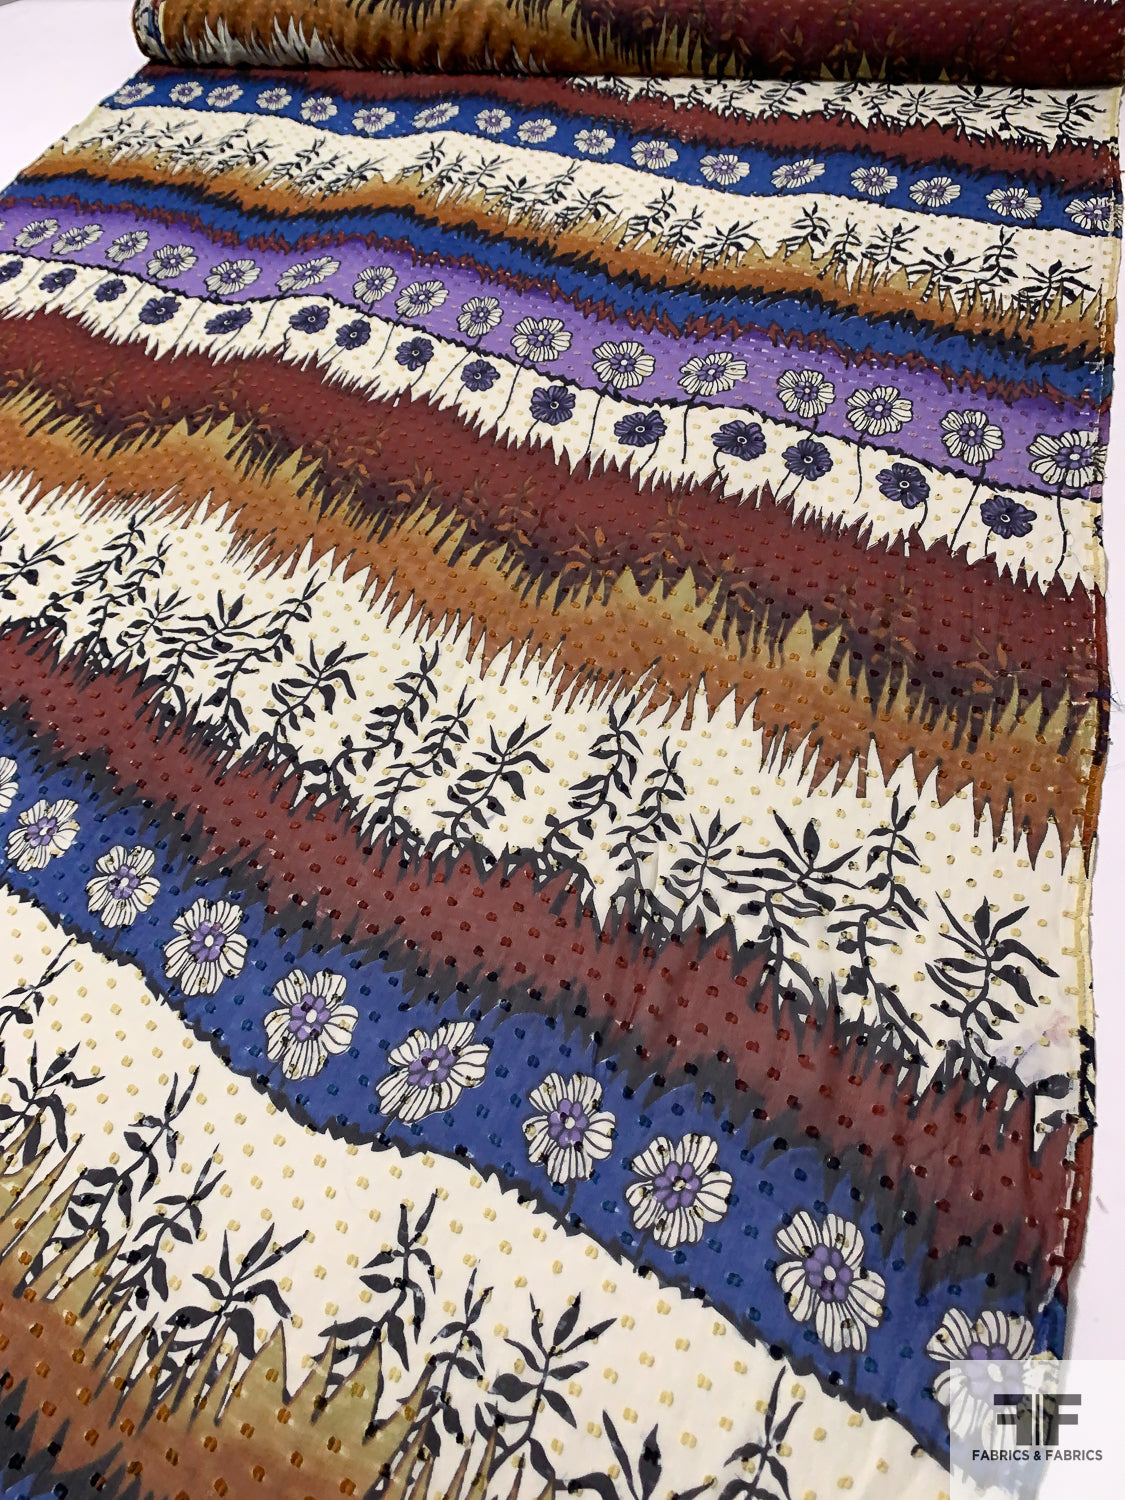 Agriculture Inspired Printed Clip Silk Chiffon - Blue / Browns / Cream / Purple